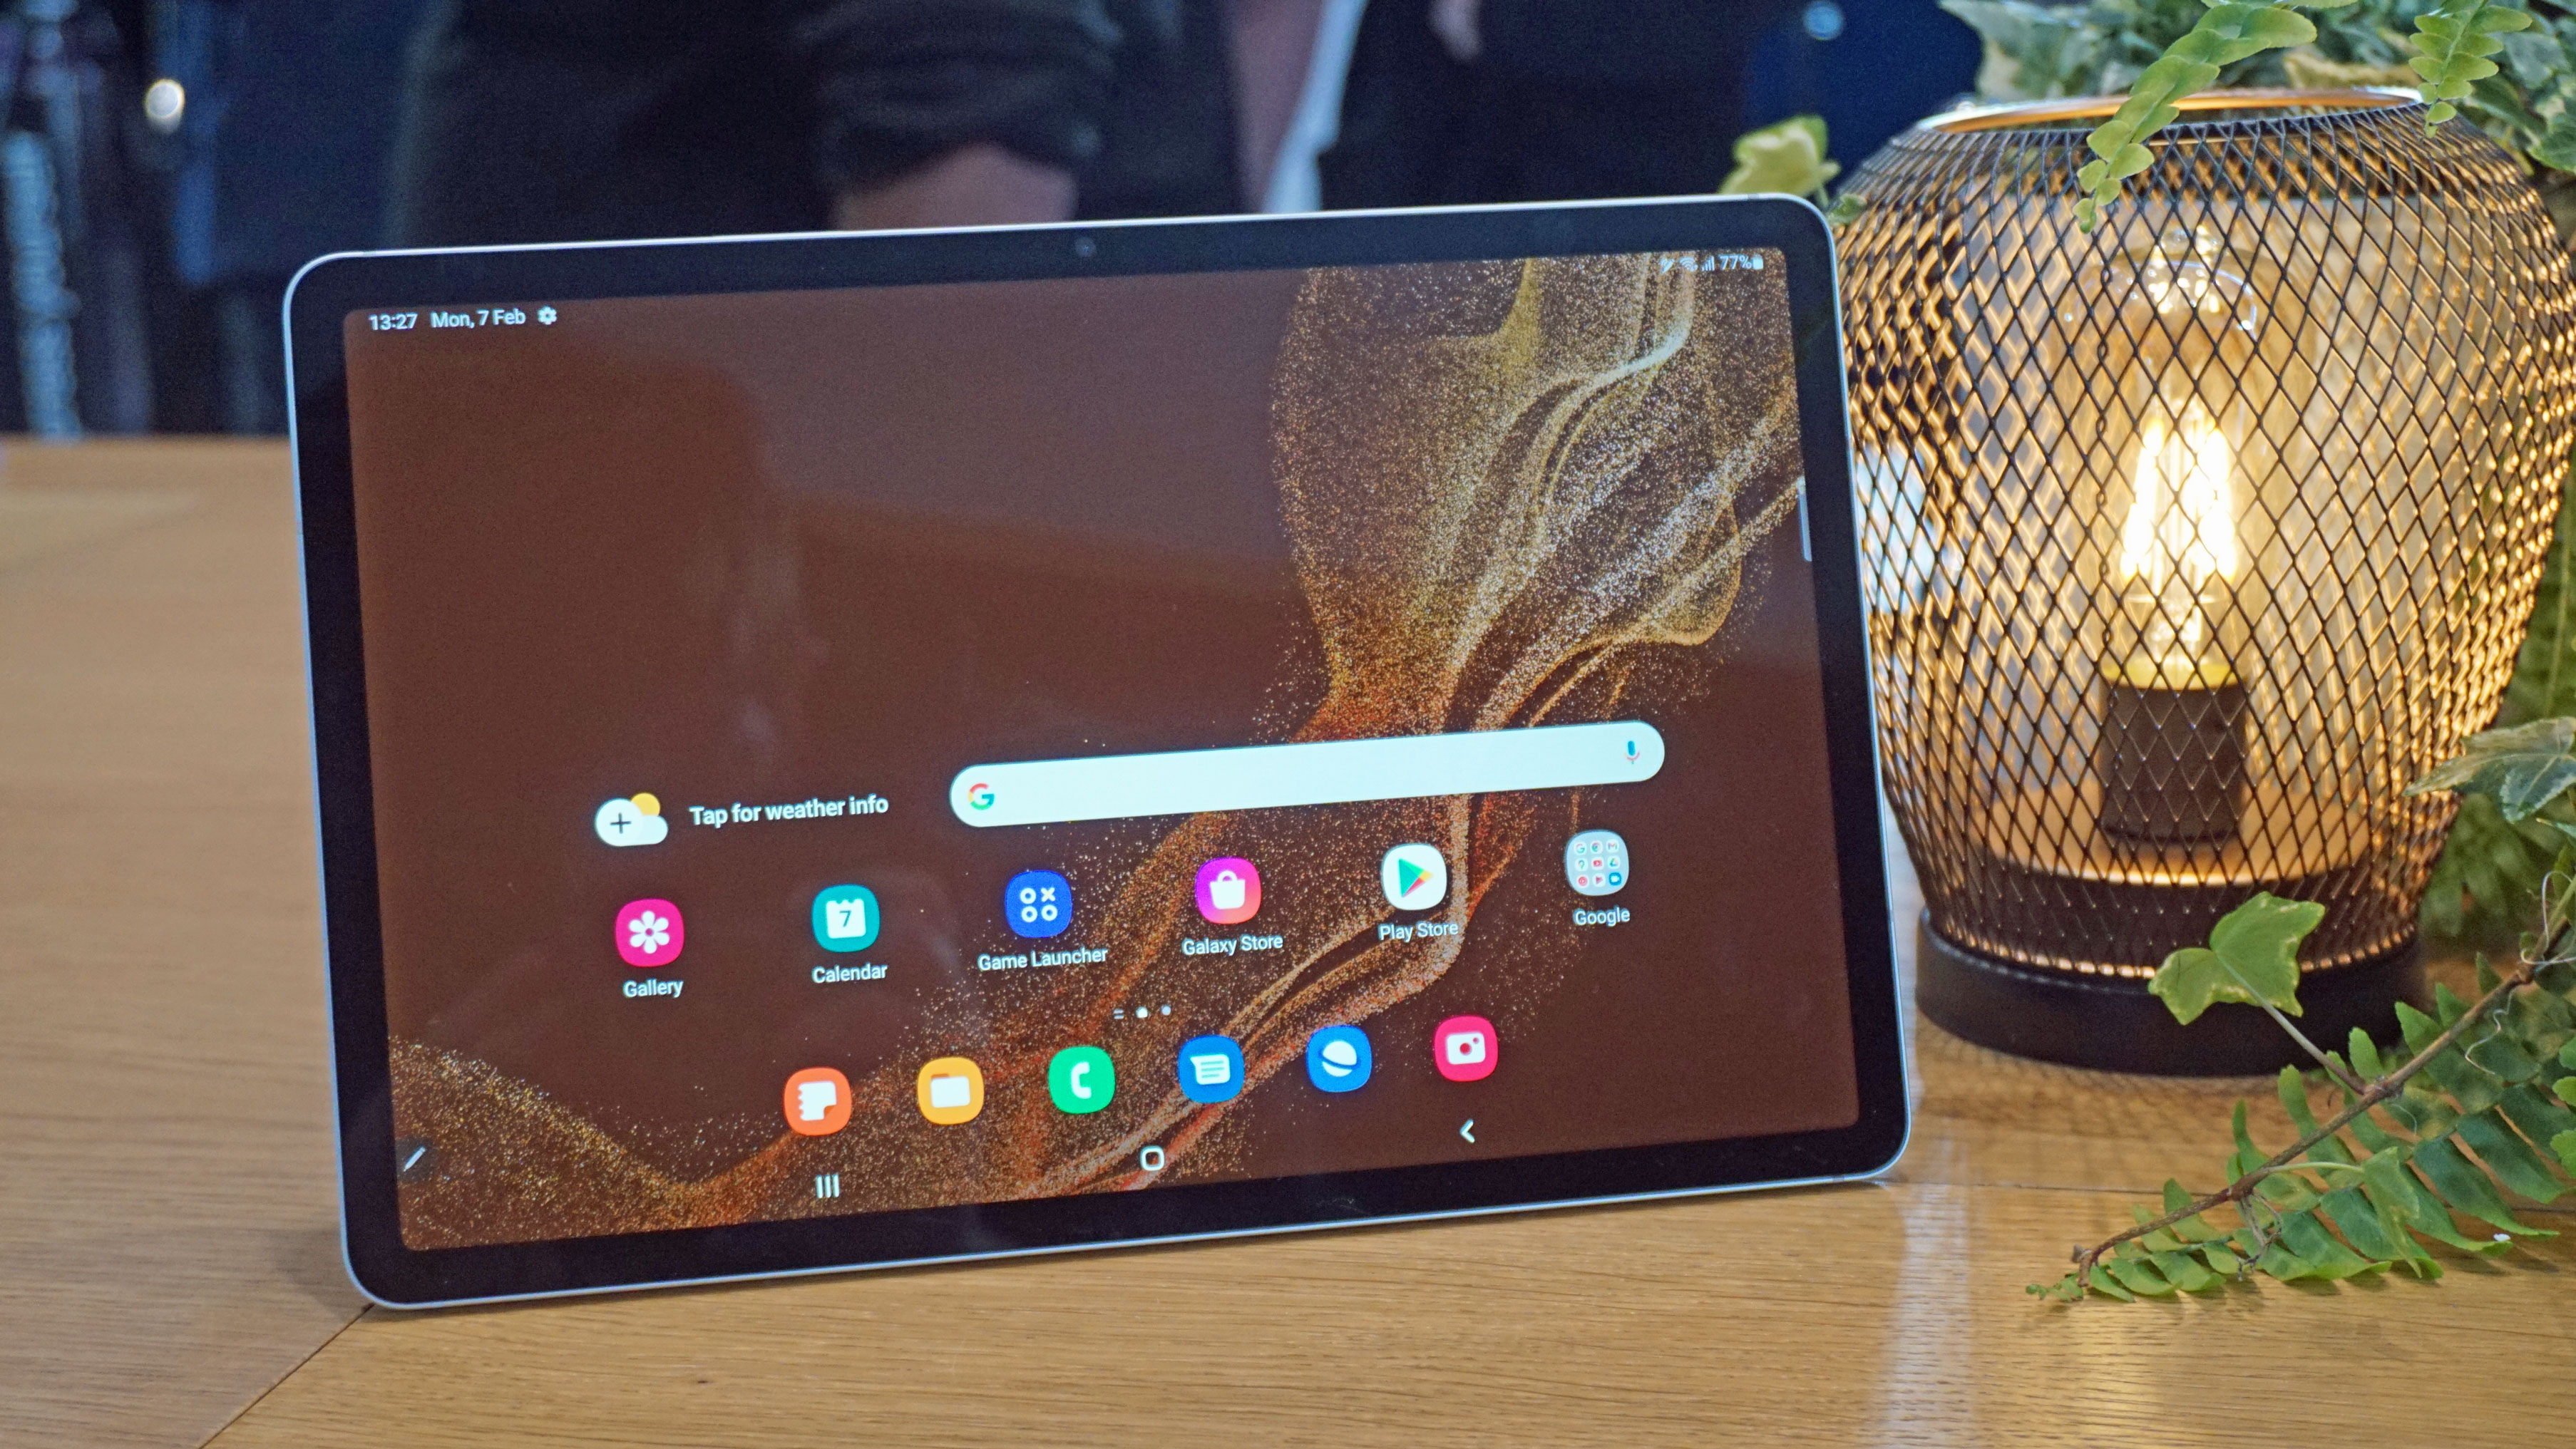 Hands on: Samsung Galaxy Tab S8 and Tab S8 Plus review